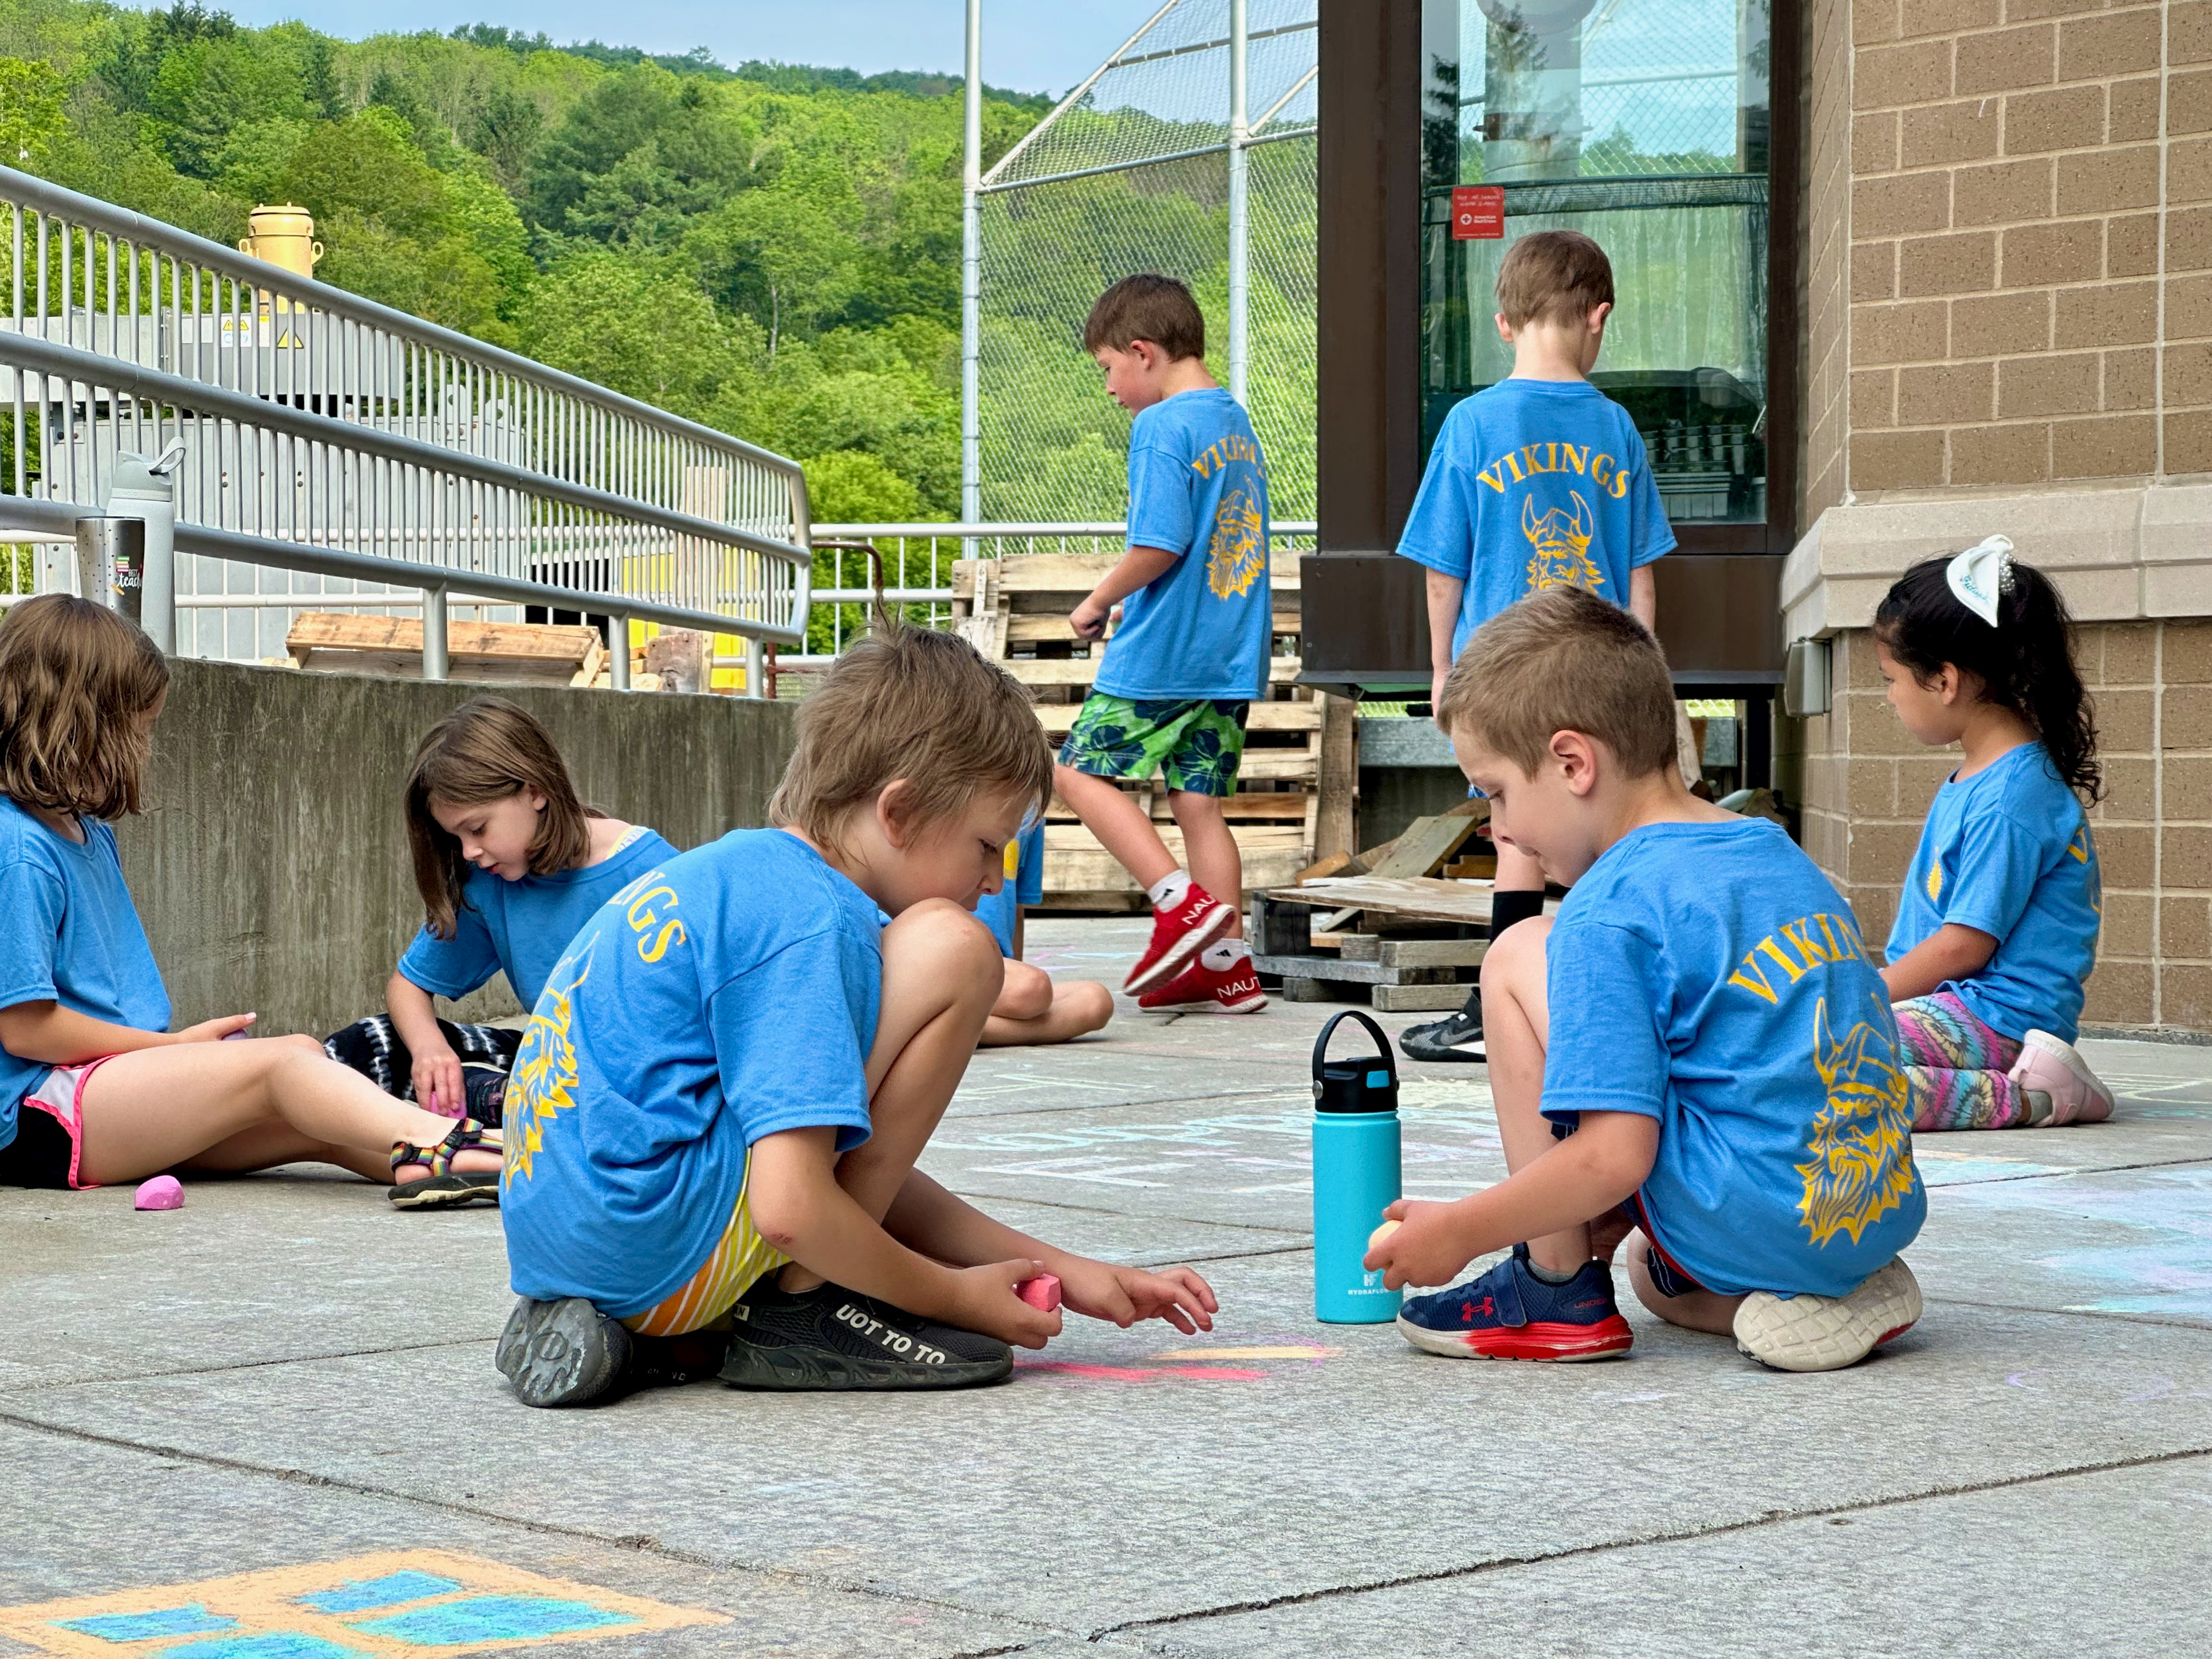 Elementary students in matching blue shirts make chalk drawings  outside school during Field Day